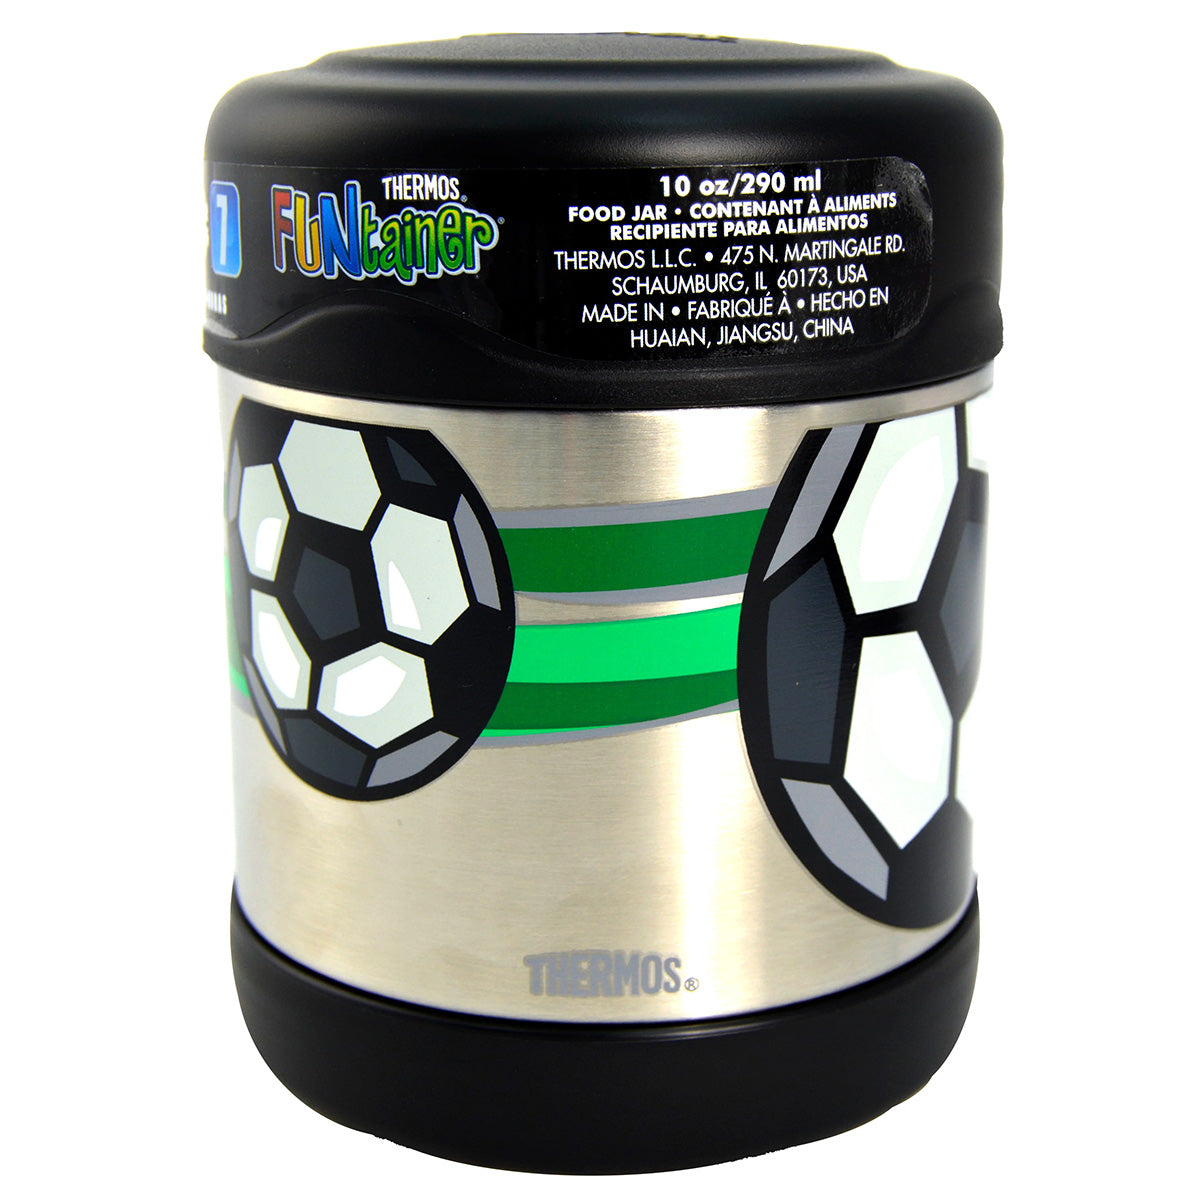 Thermos - Funtainer Stainless Steel Food Jar - Foot Ball (290 ml)